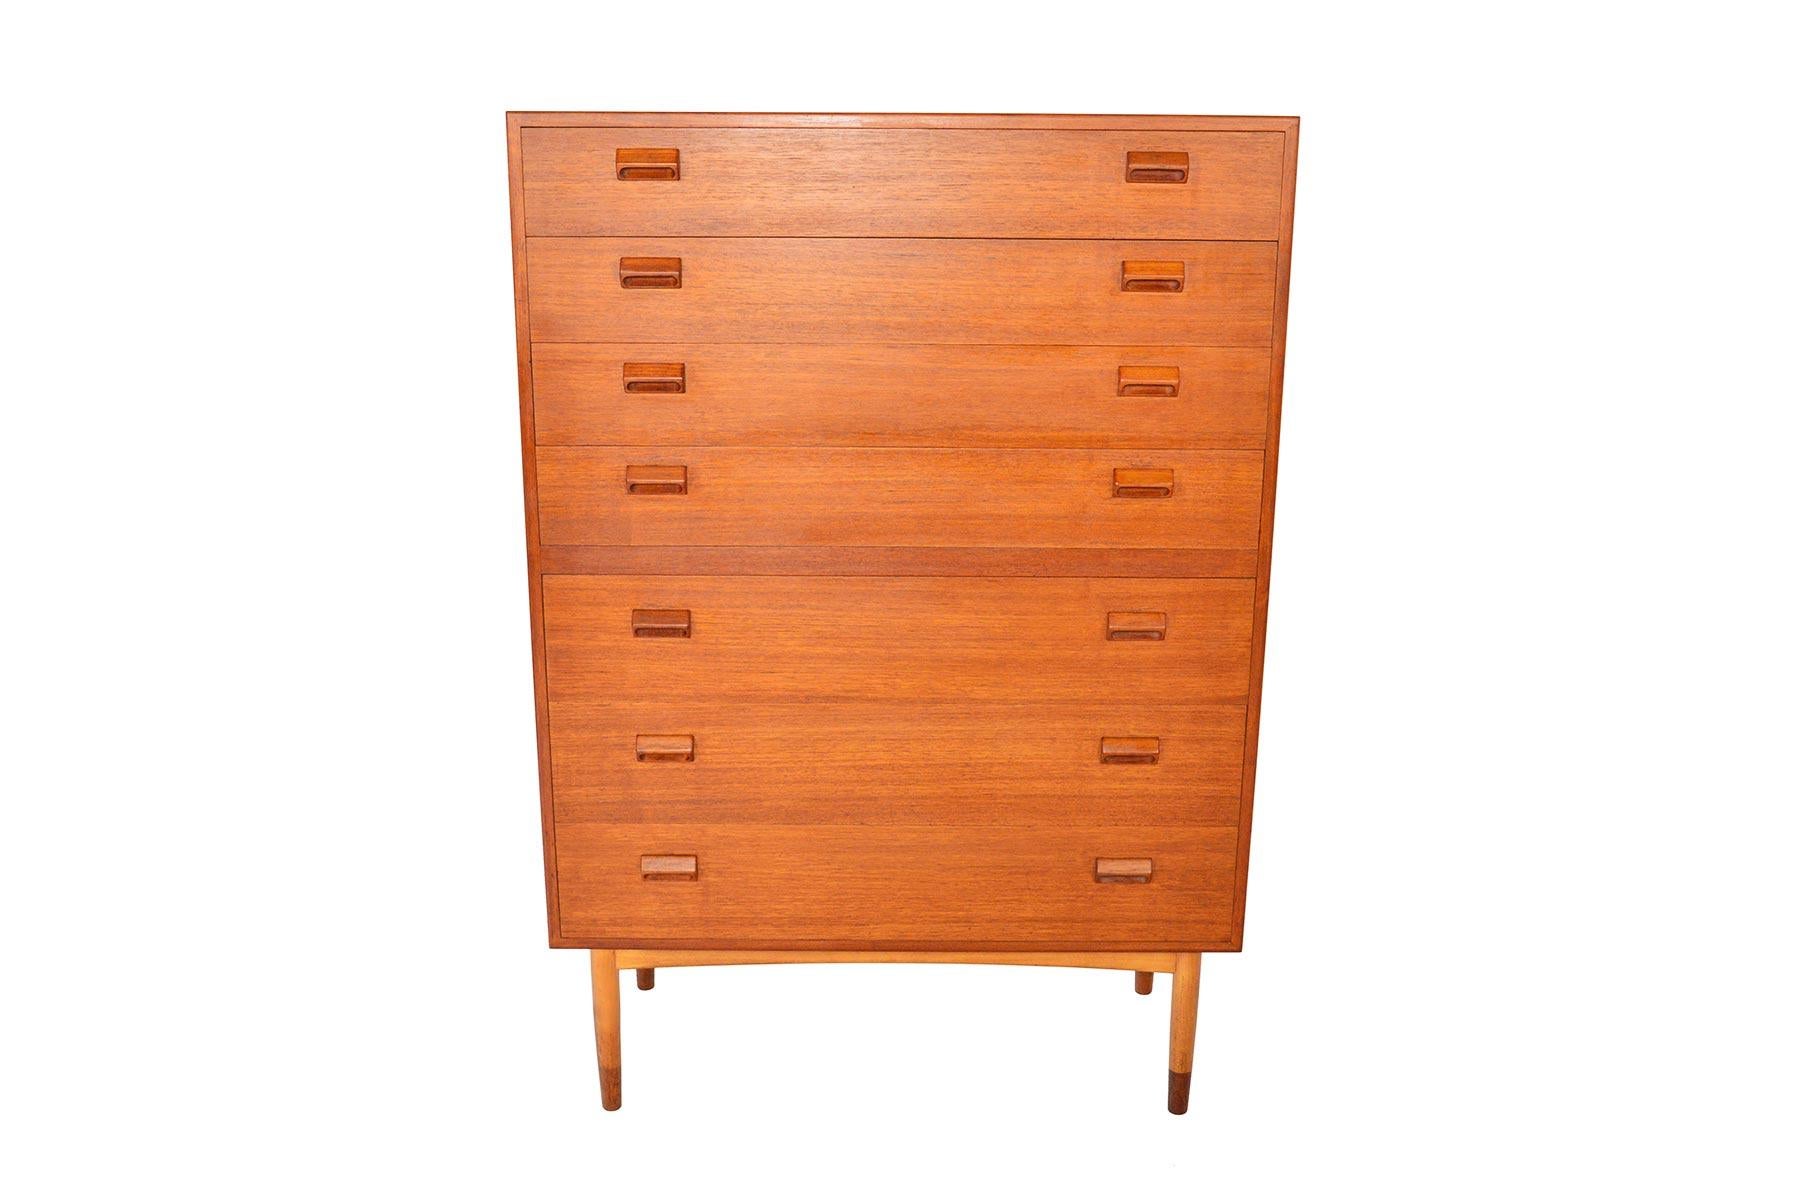 One of the largest highboy dressers ever produced in Denmark, this massive piece designed by Børge Mogensen for Søborg Møbelfabrik in 1951. The case is crafted in teak and stands on an oak base. Each drawer is adorned with the designer’s signature